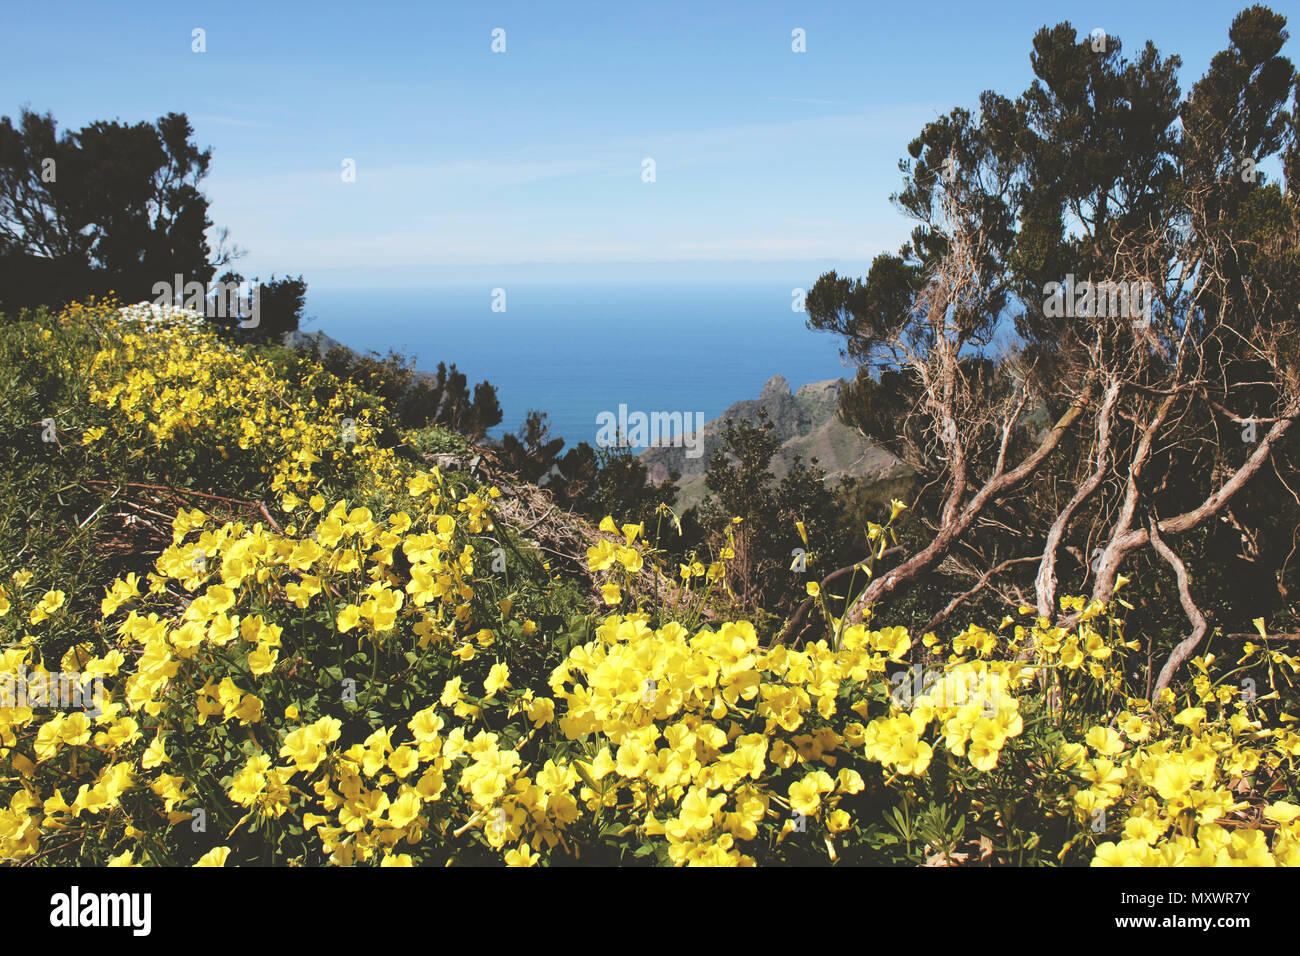 A heavenly view over various flowers and the ocean on Tenerife, Spain Stock Photo